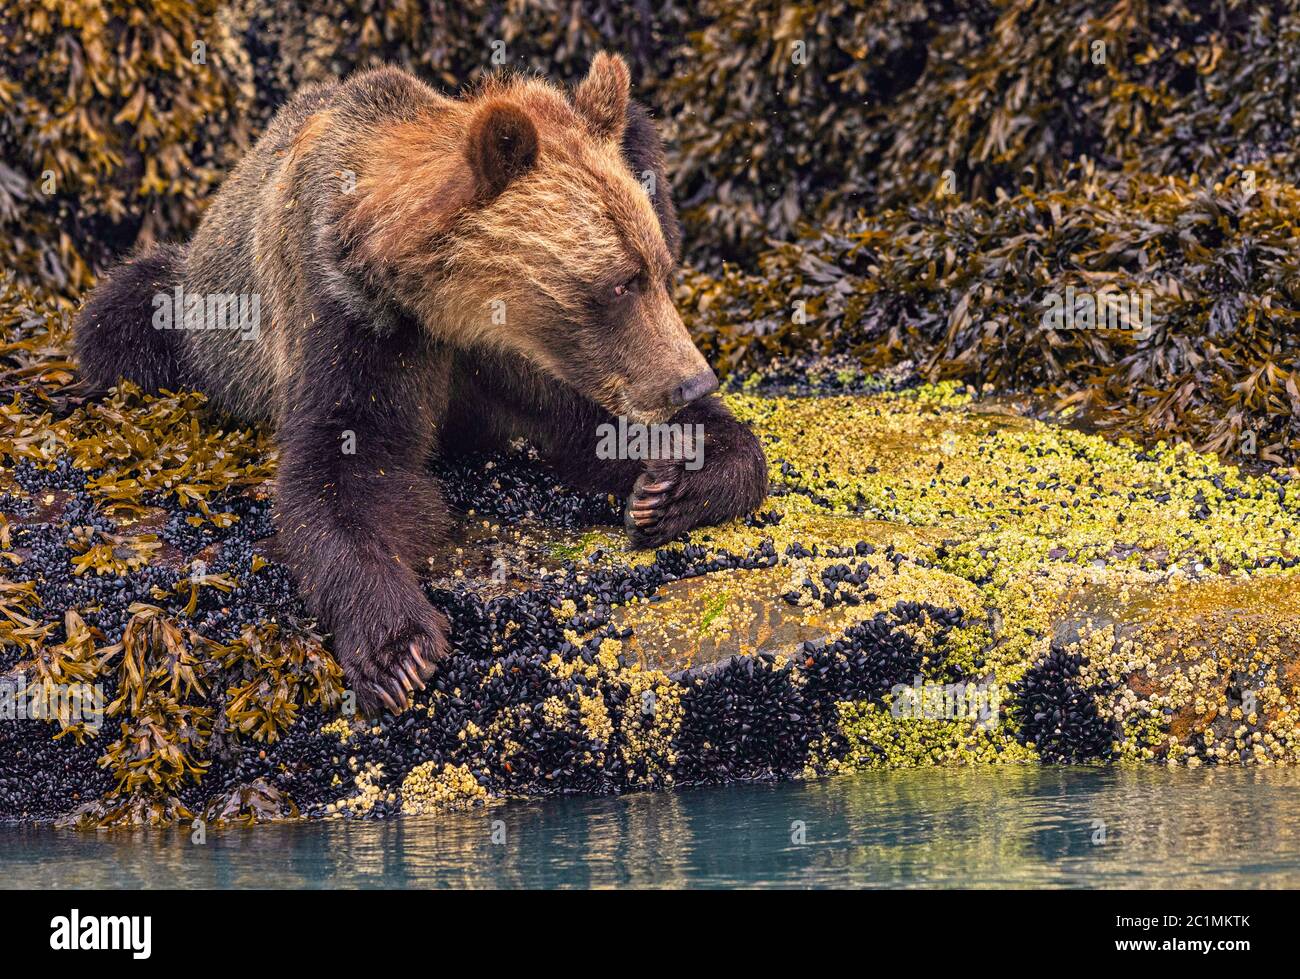 Coastal grizzly bear resting on mussels during low tide in Knight Inlet, First Nations Territory, British Columbia, Canada. Stock Photo